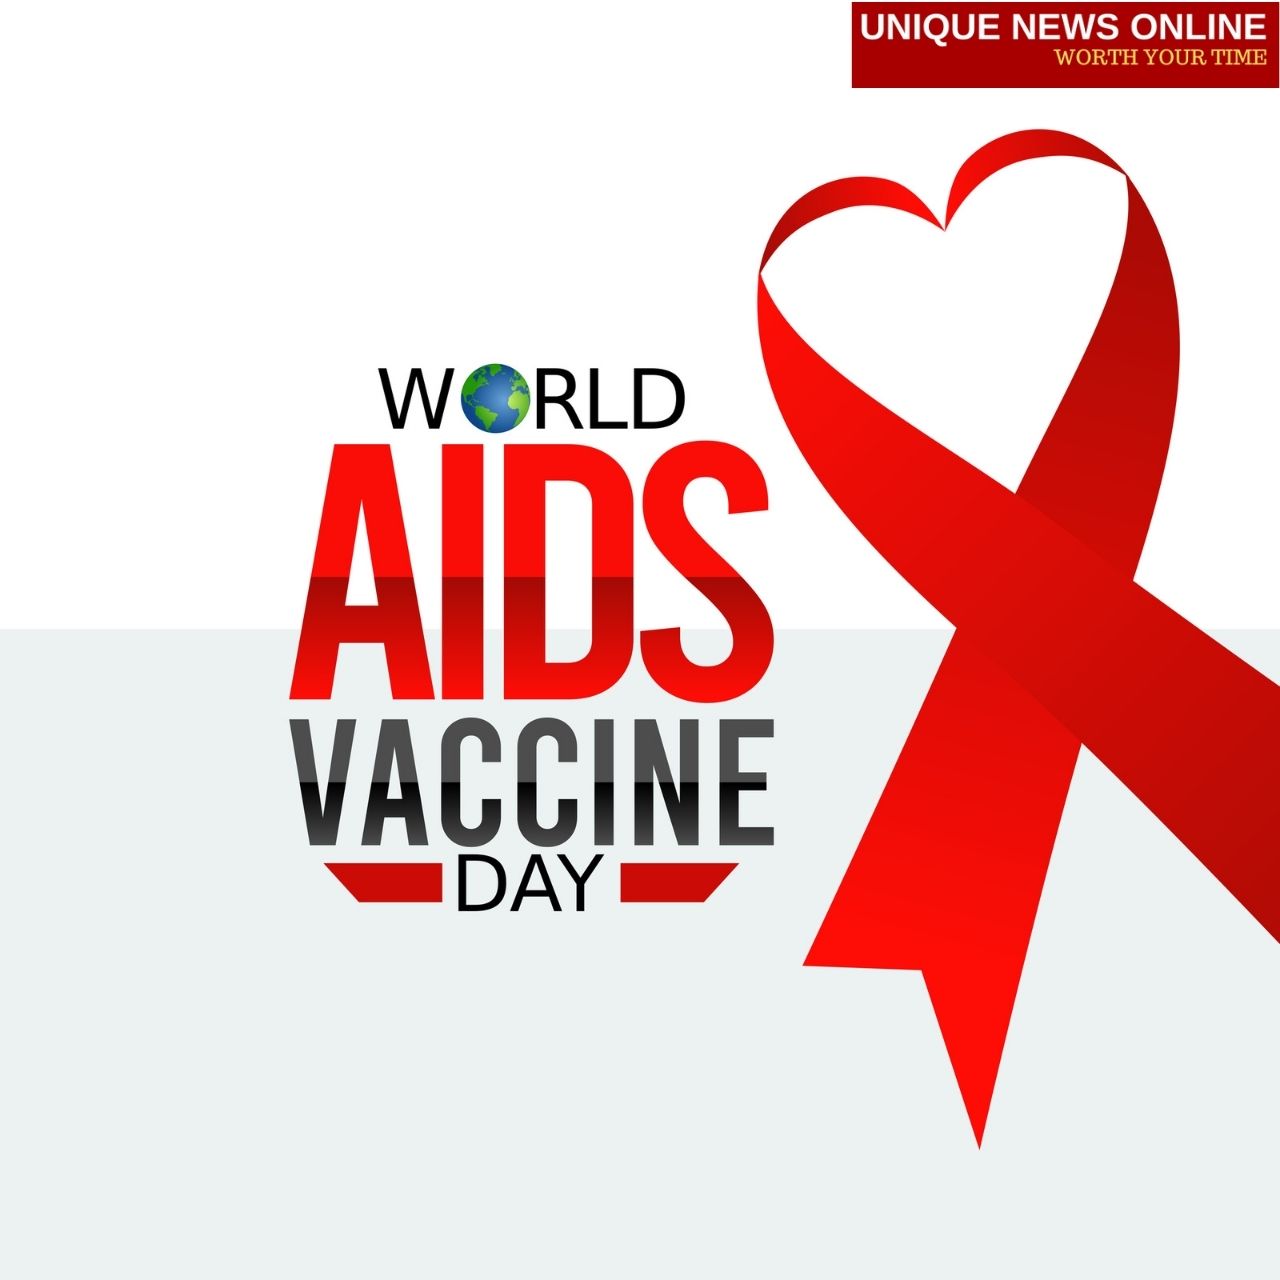 World AIDS Vaccine Day 2021: Theme, Quotes, Images, Poster, WhatsApp Status, SMS, Wishes, and WhatsApp Status Video Download for HIV Vaccine Awareness Day